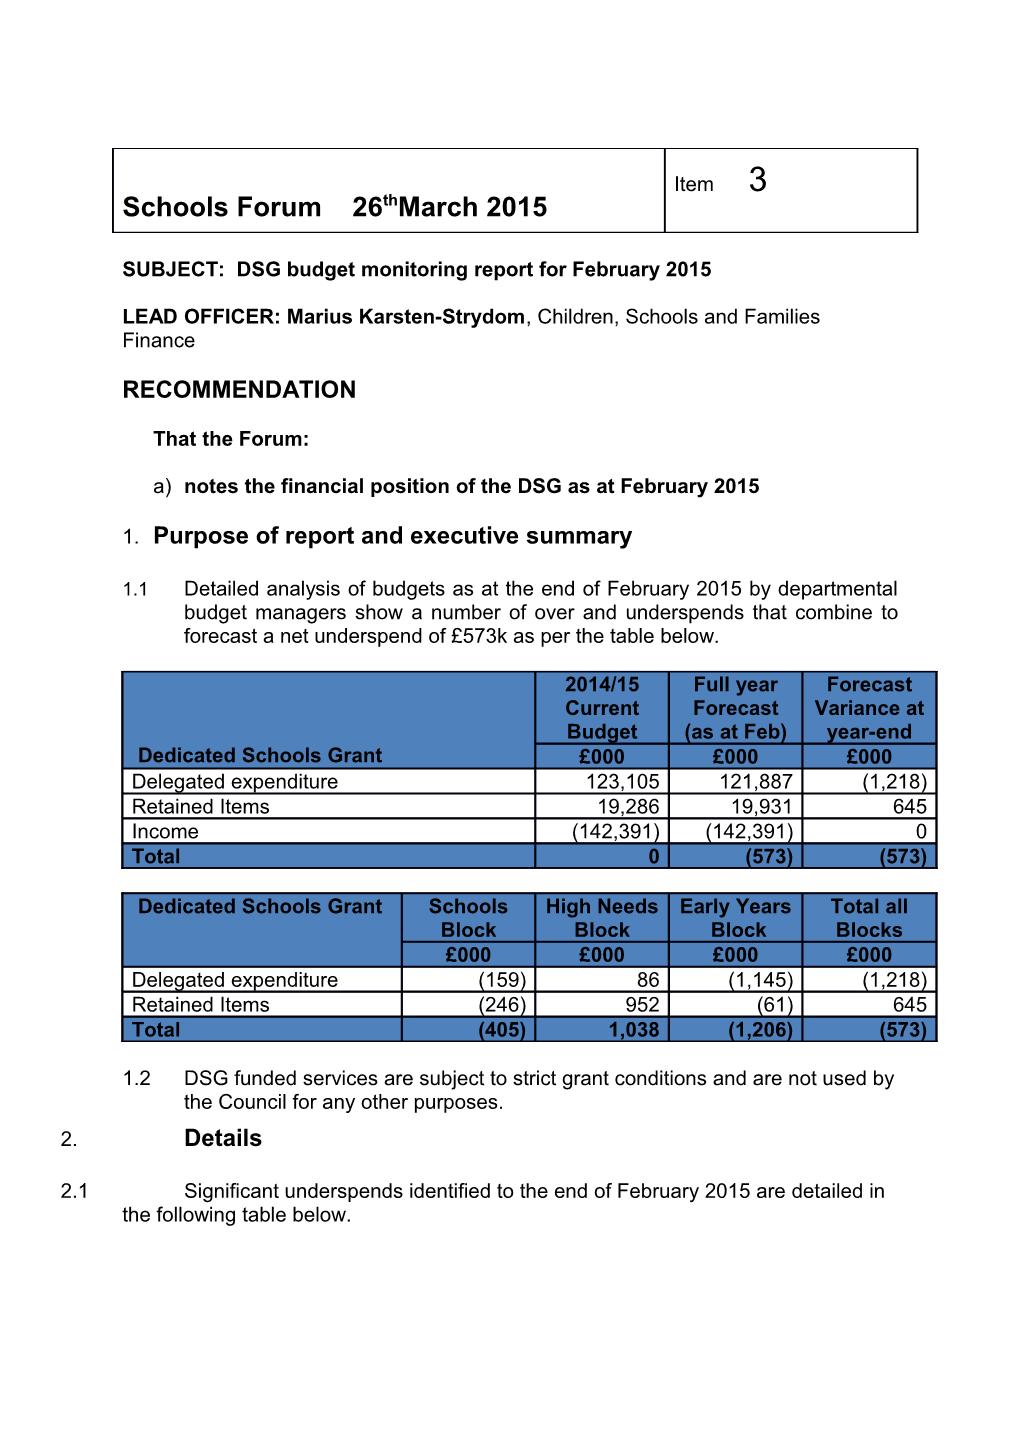 SUBJECT: DSG Budget Monitoring Report for February 2015